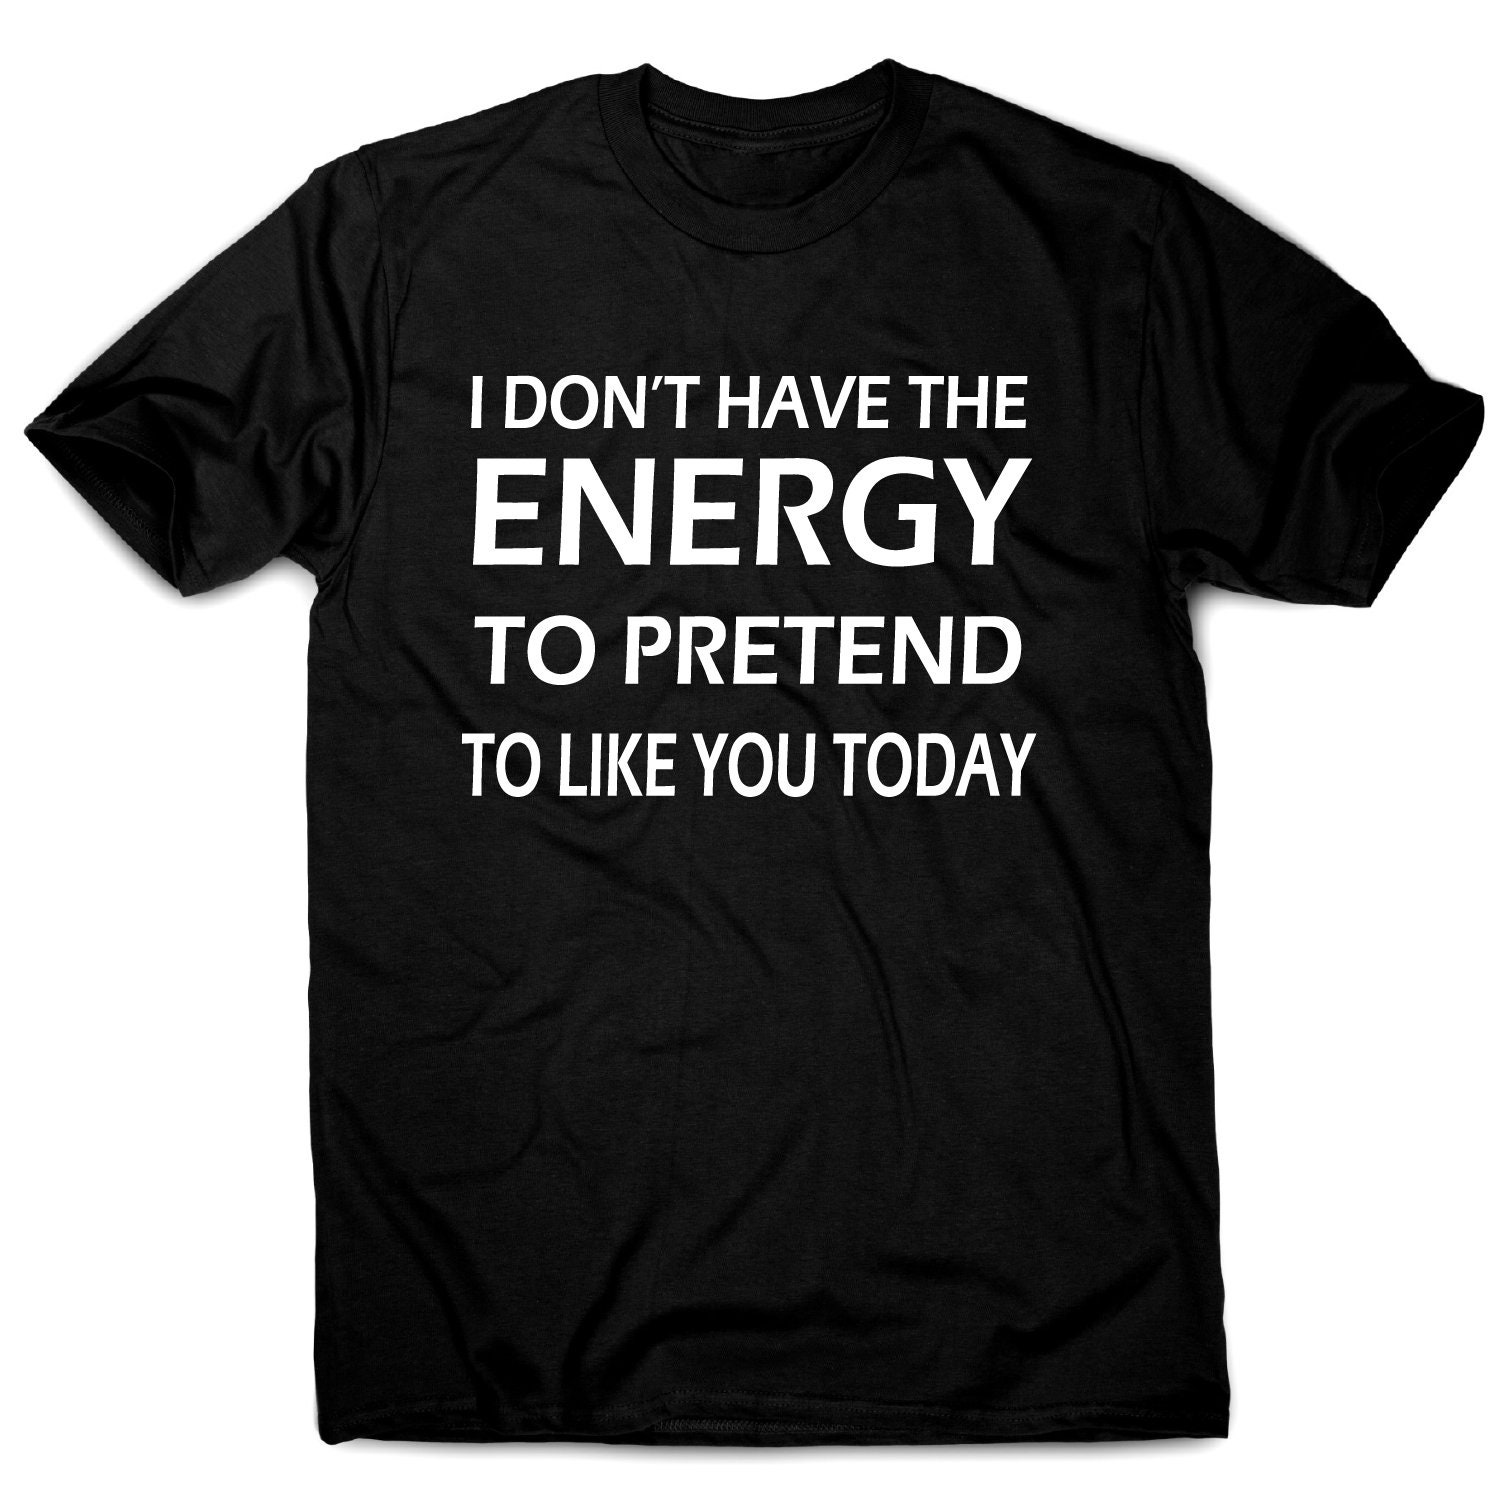 I don't have the energy funny rude offensive slogan | Etsy